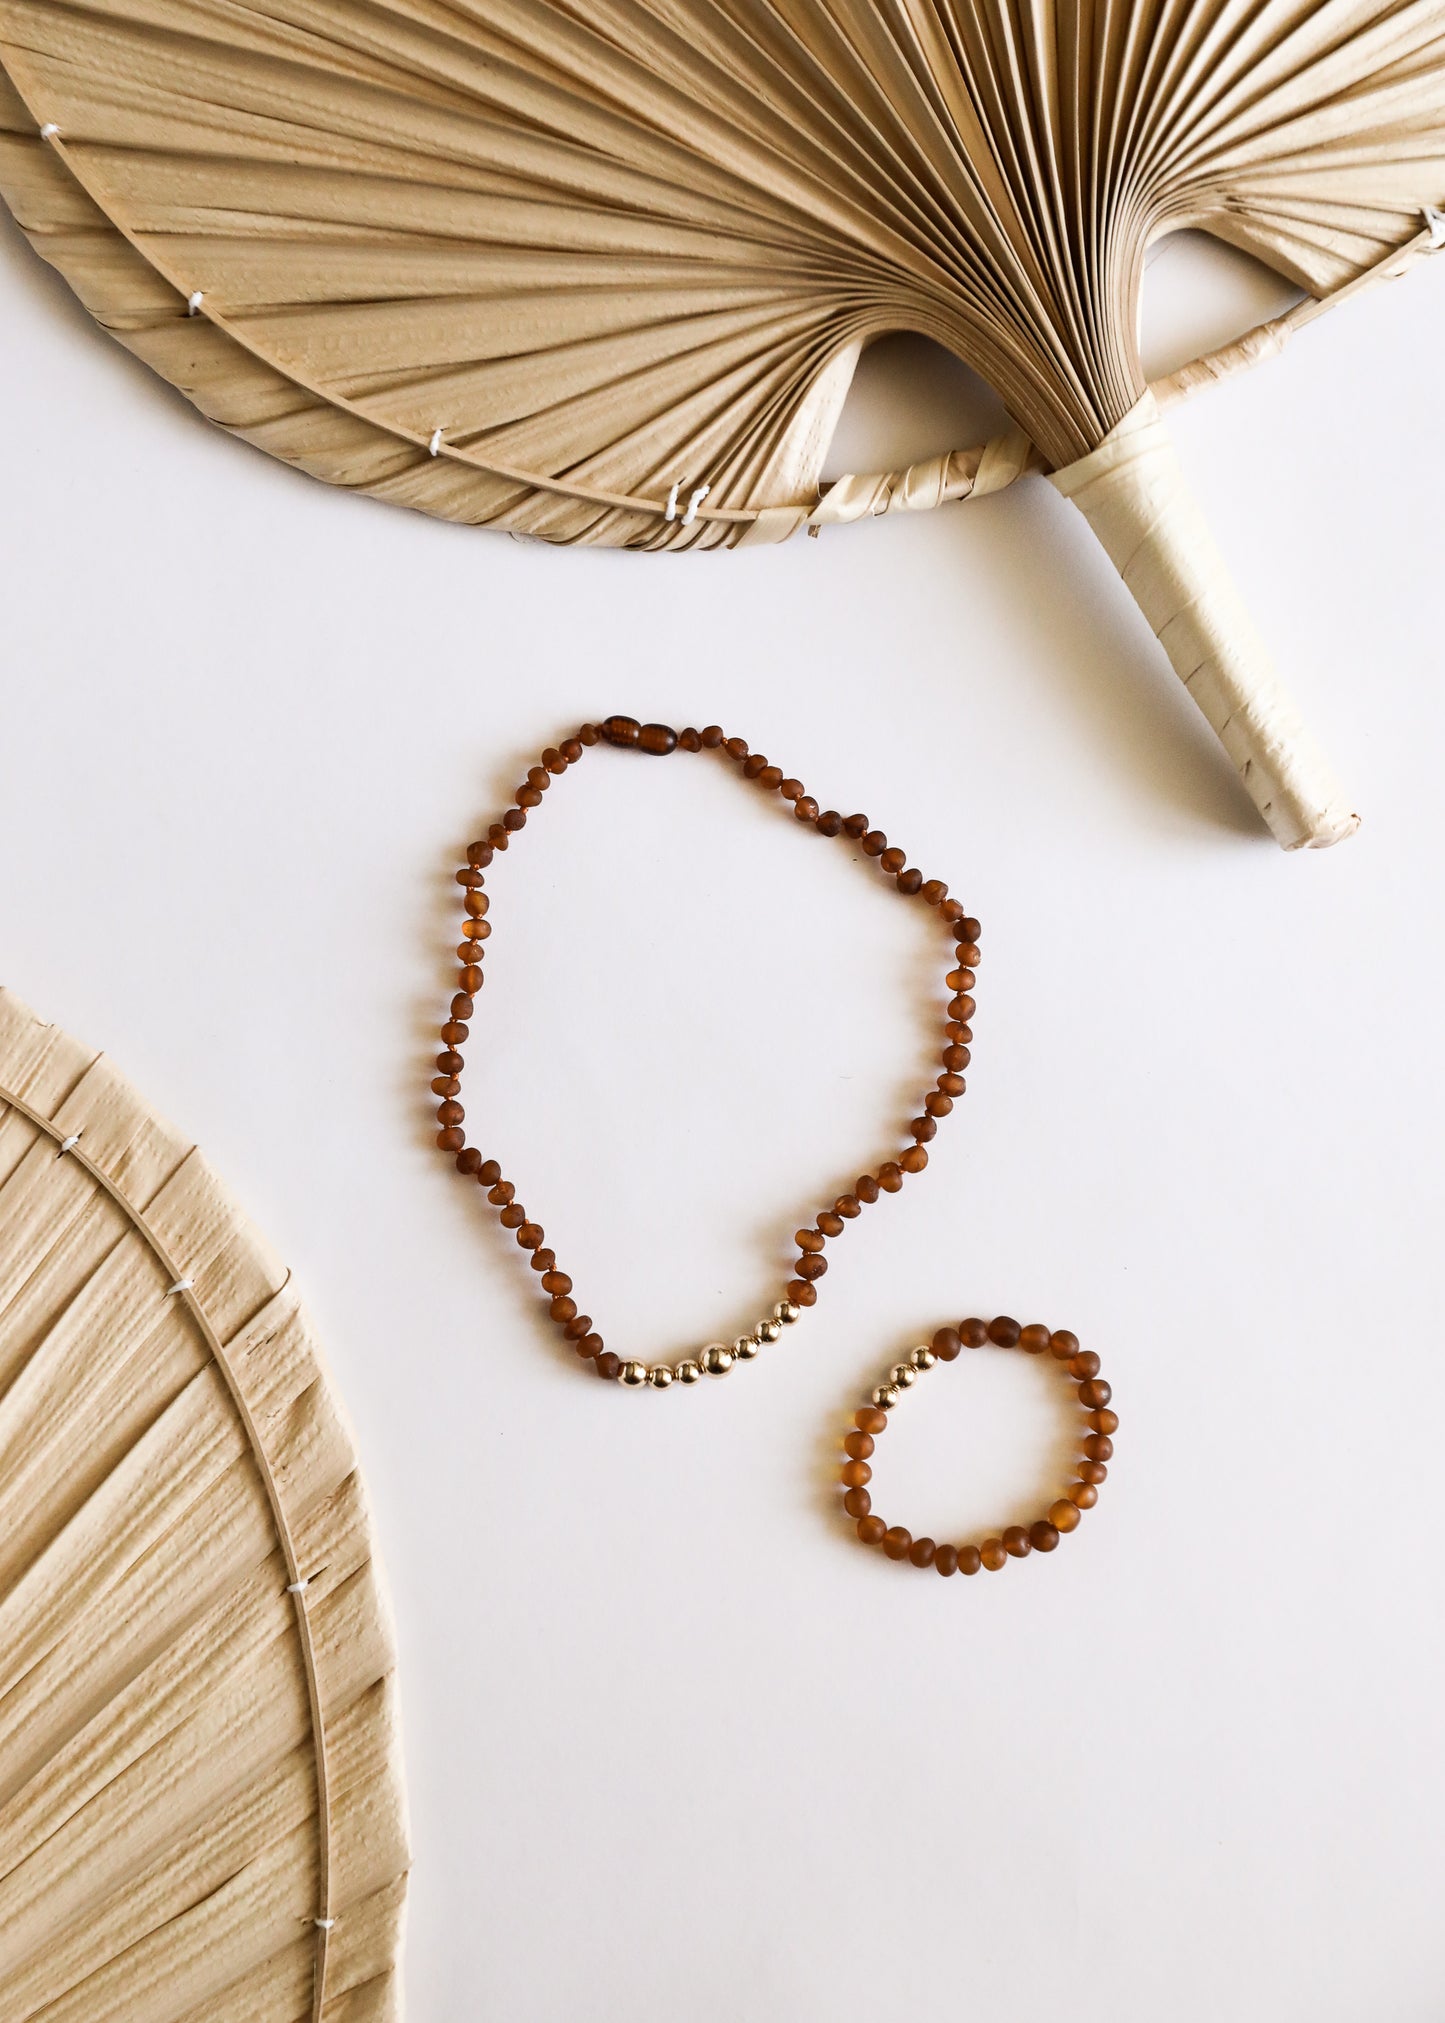 Raw Cognac Baltic Amber + Gold || Adult Necklace